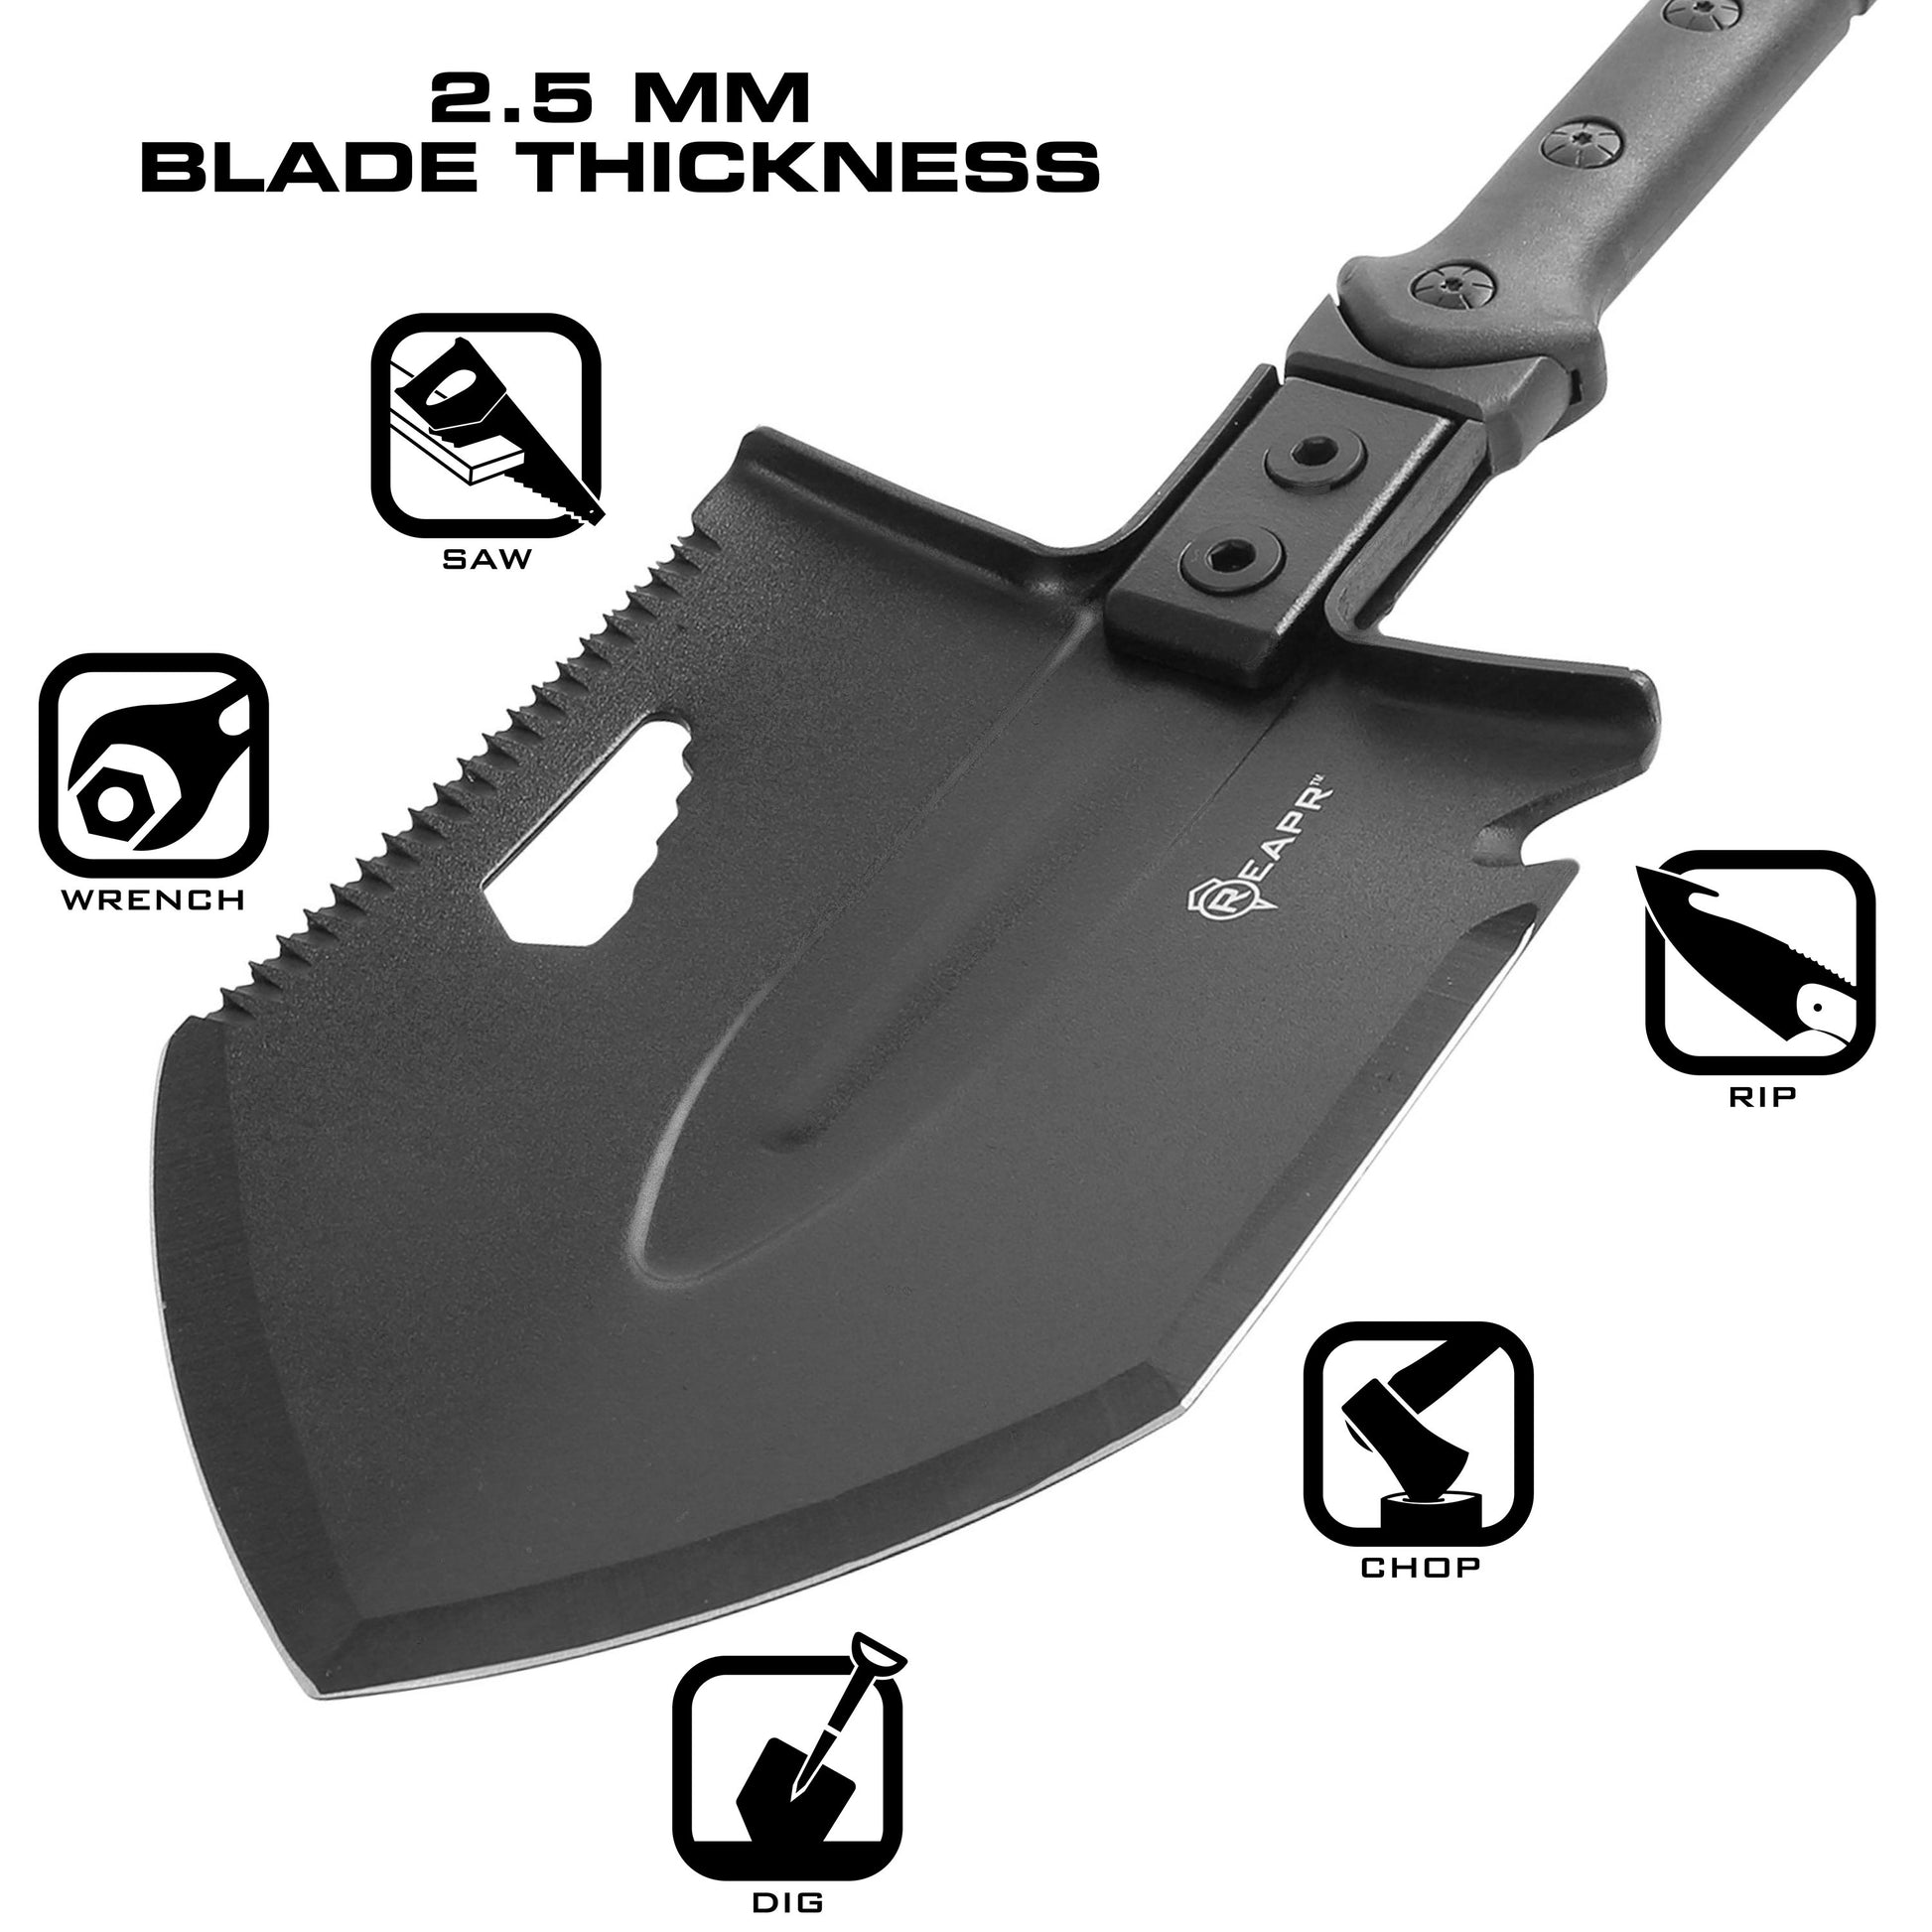  REAPR 11021 TAC Survival Shovel compact, space saving tool with saw edge, ripper, chopping edge and wrenches.